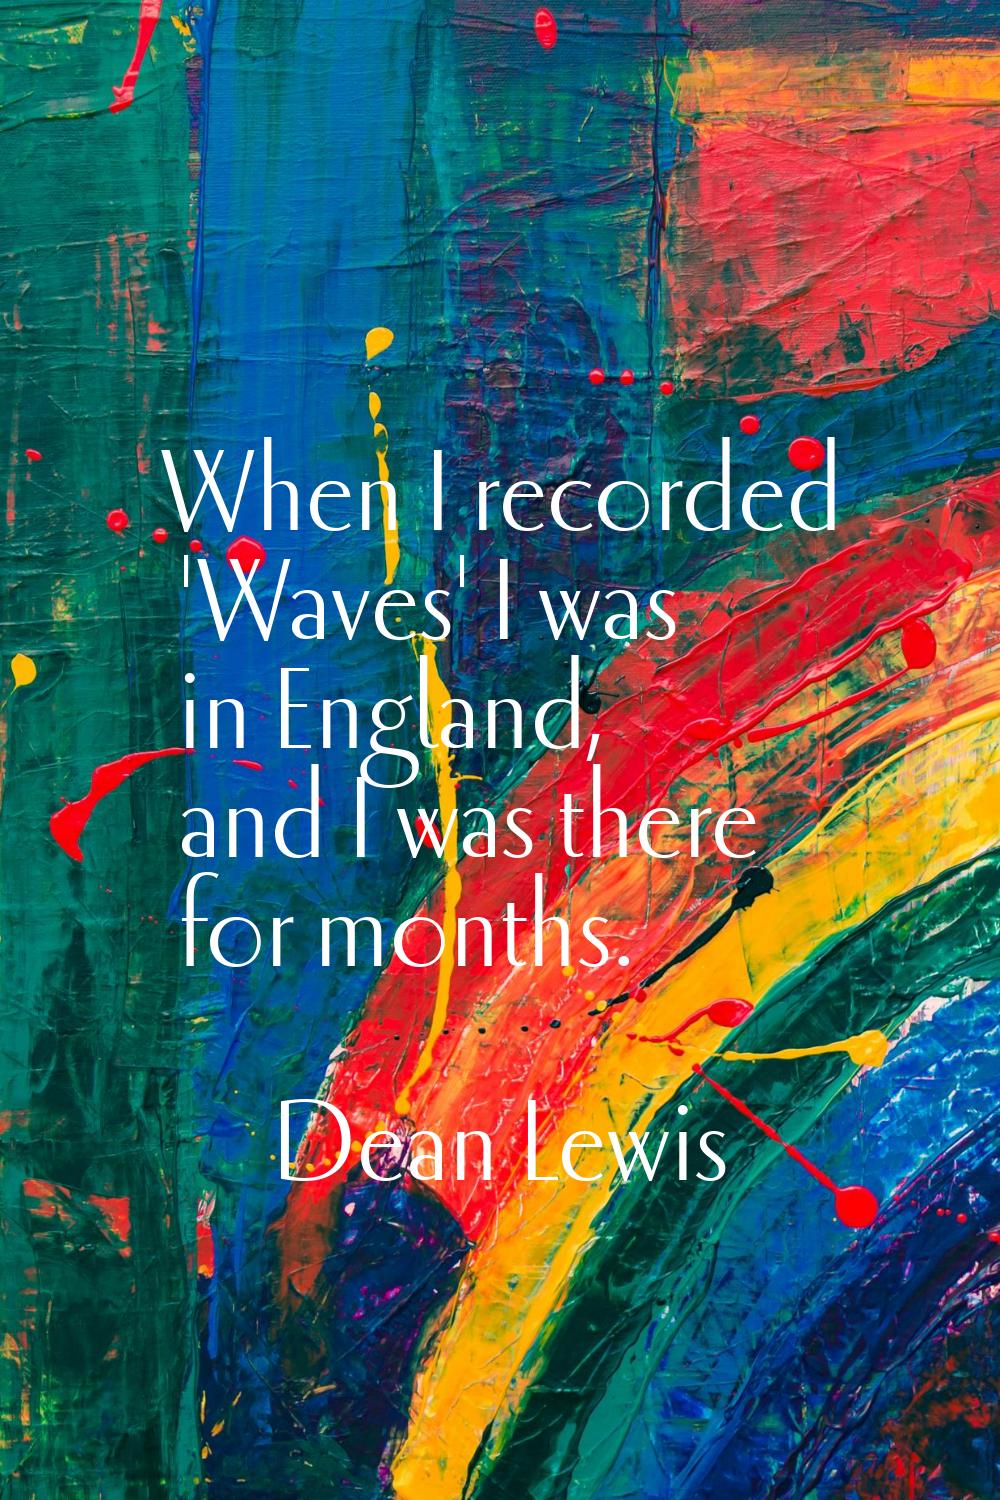 When I recorded 'Waves' I was in England, and I was there for months.